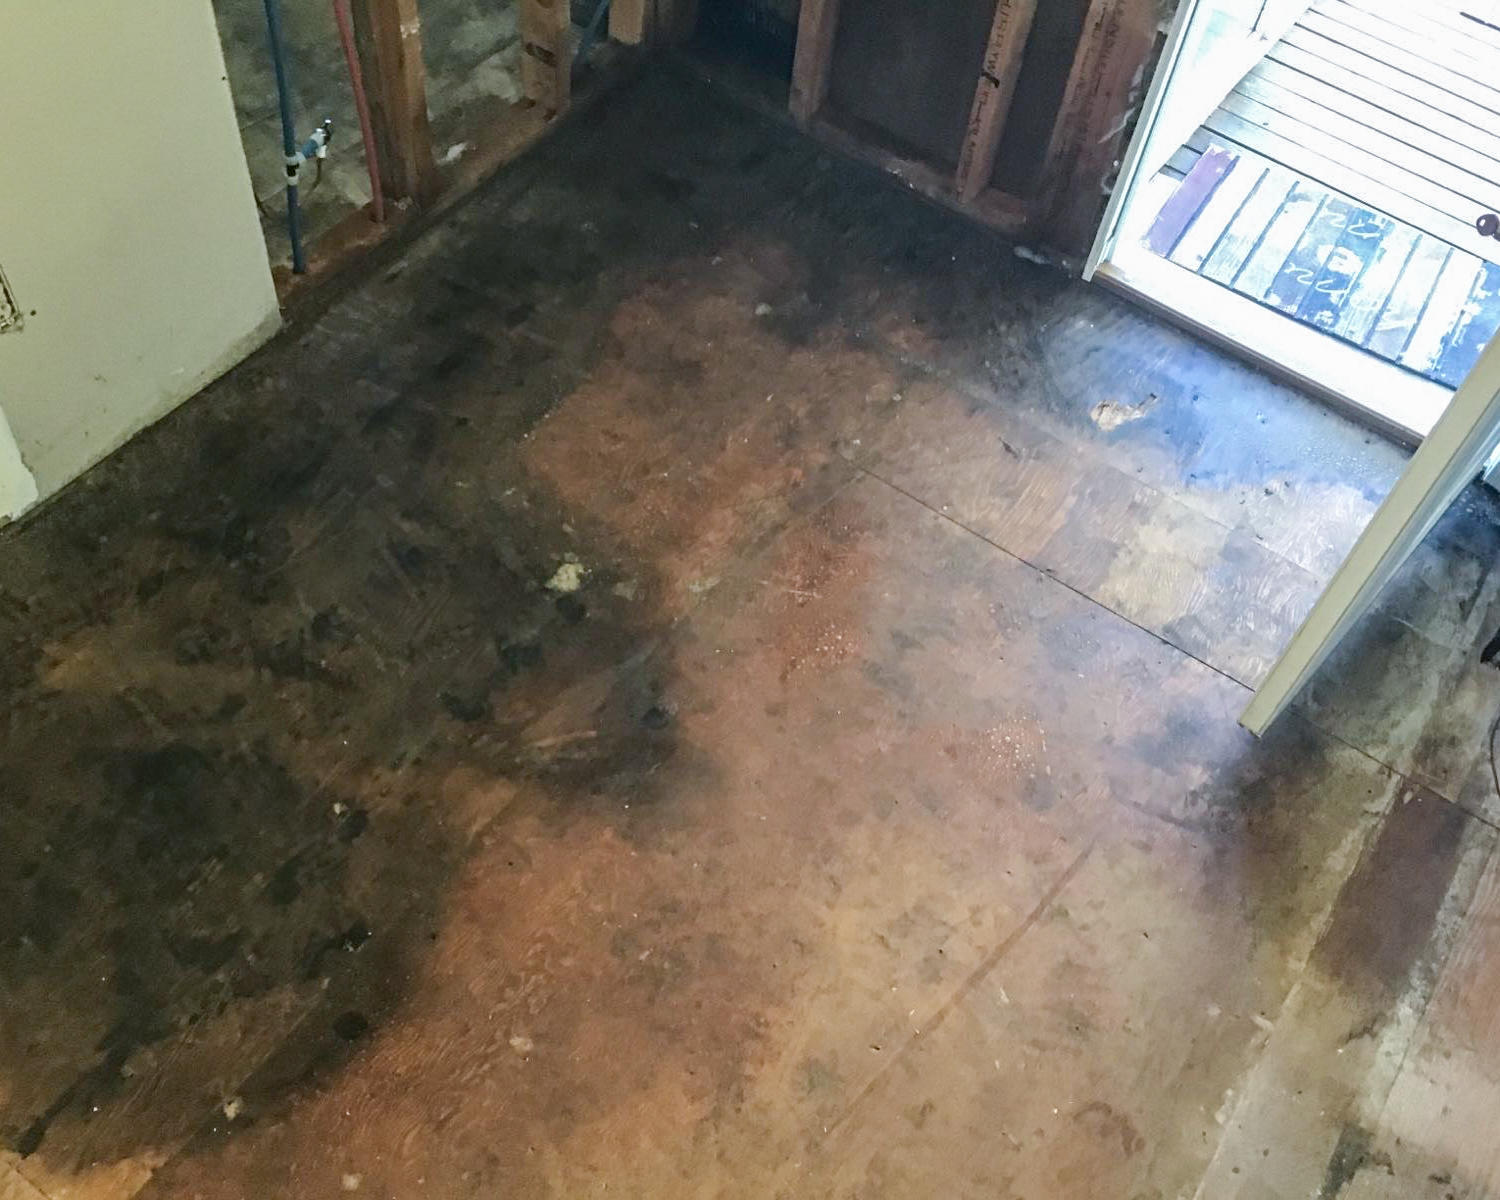 If you suspect or have discovered a potential mold infestation on your Auburn residential or commercial property, give our SERVPRO of Auburn / Enumclaw team a call